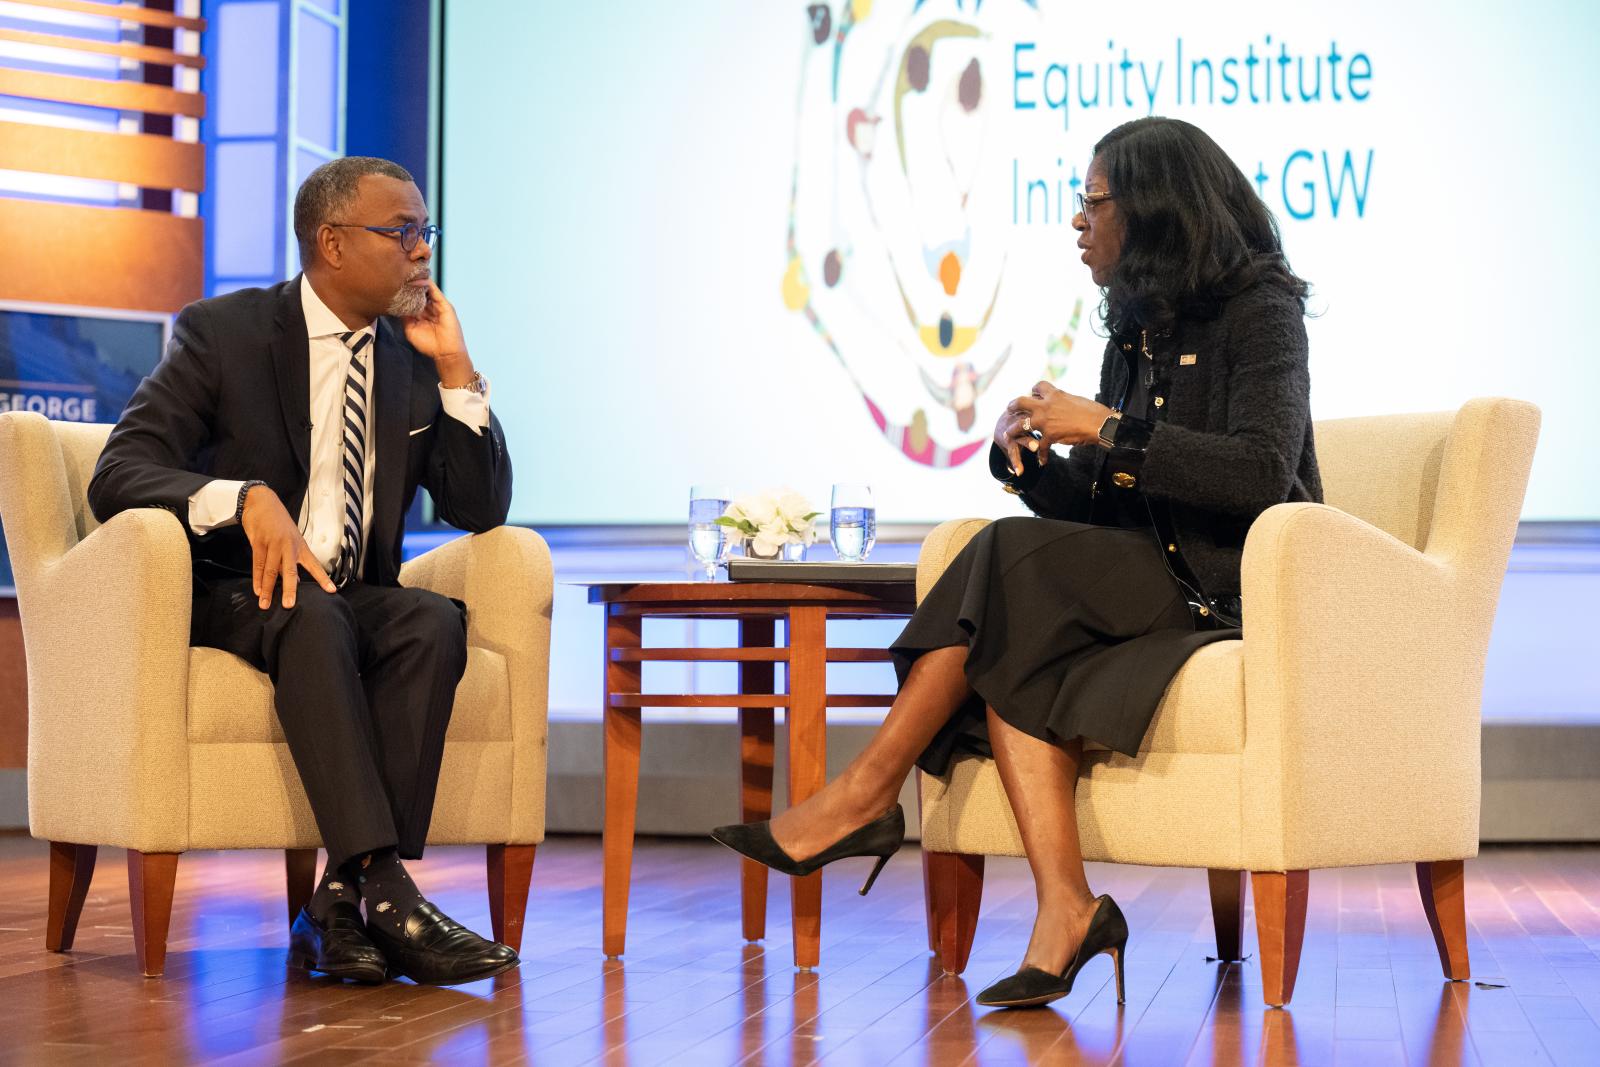 Princeton University's Eddie Glaude and Dean Dayna Bowen Matthew in conversation as part of the Equity Institute's fall research showcase last year. (William Atkins/GW Today)